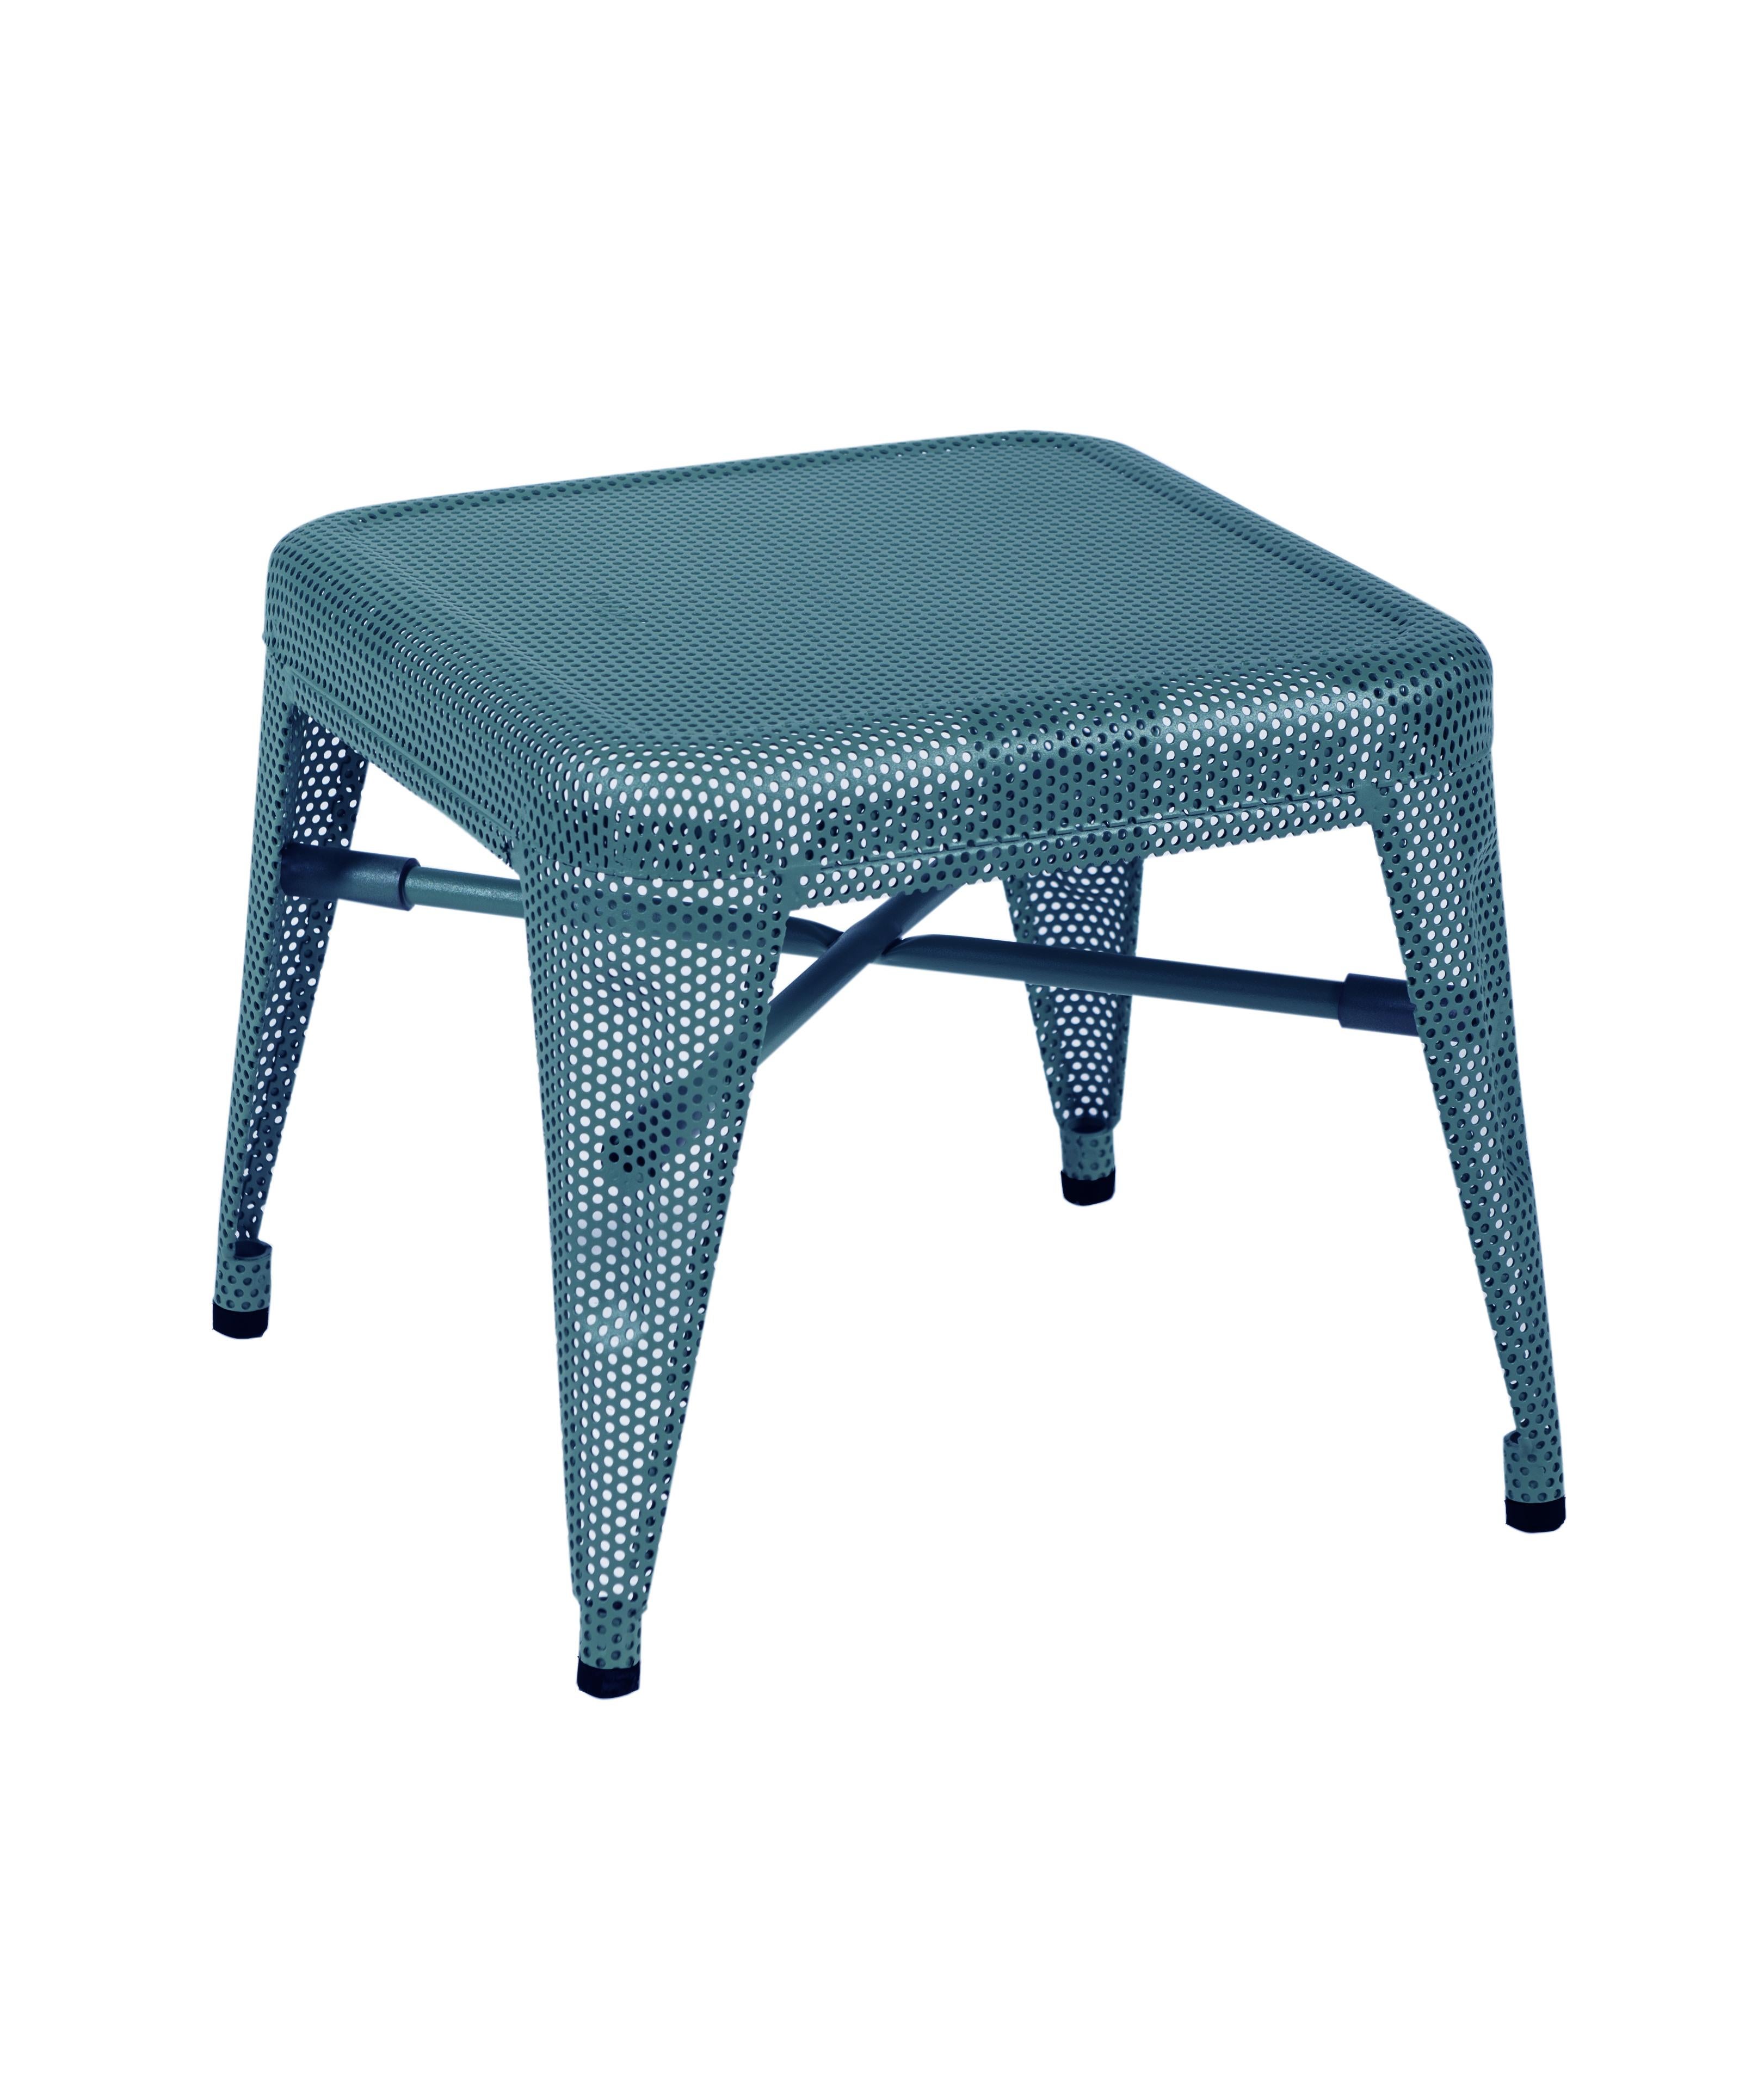 For Sale: Blue (Bleu Ocean) H30 Indoor Perforated Steel Stool in Essential Colors by Tolix